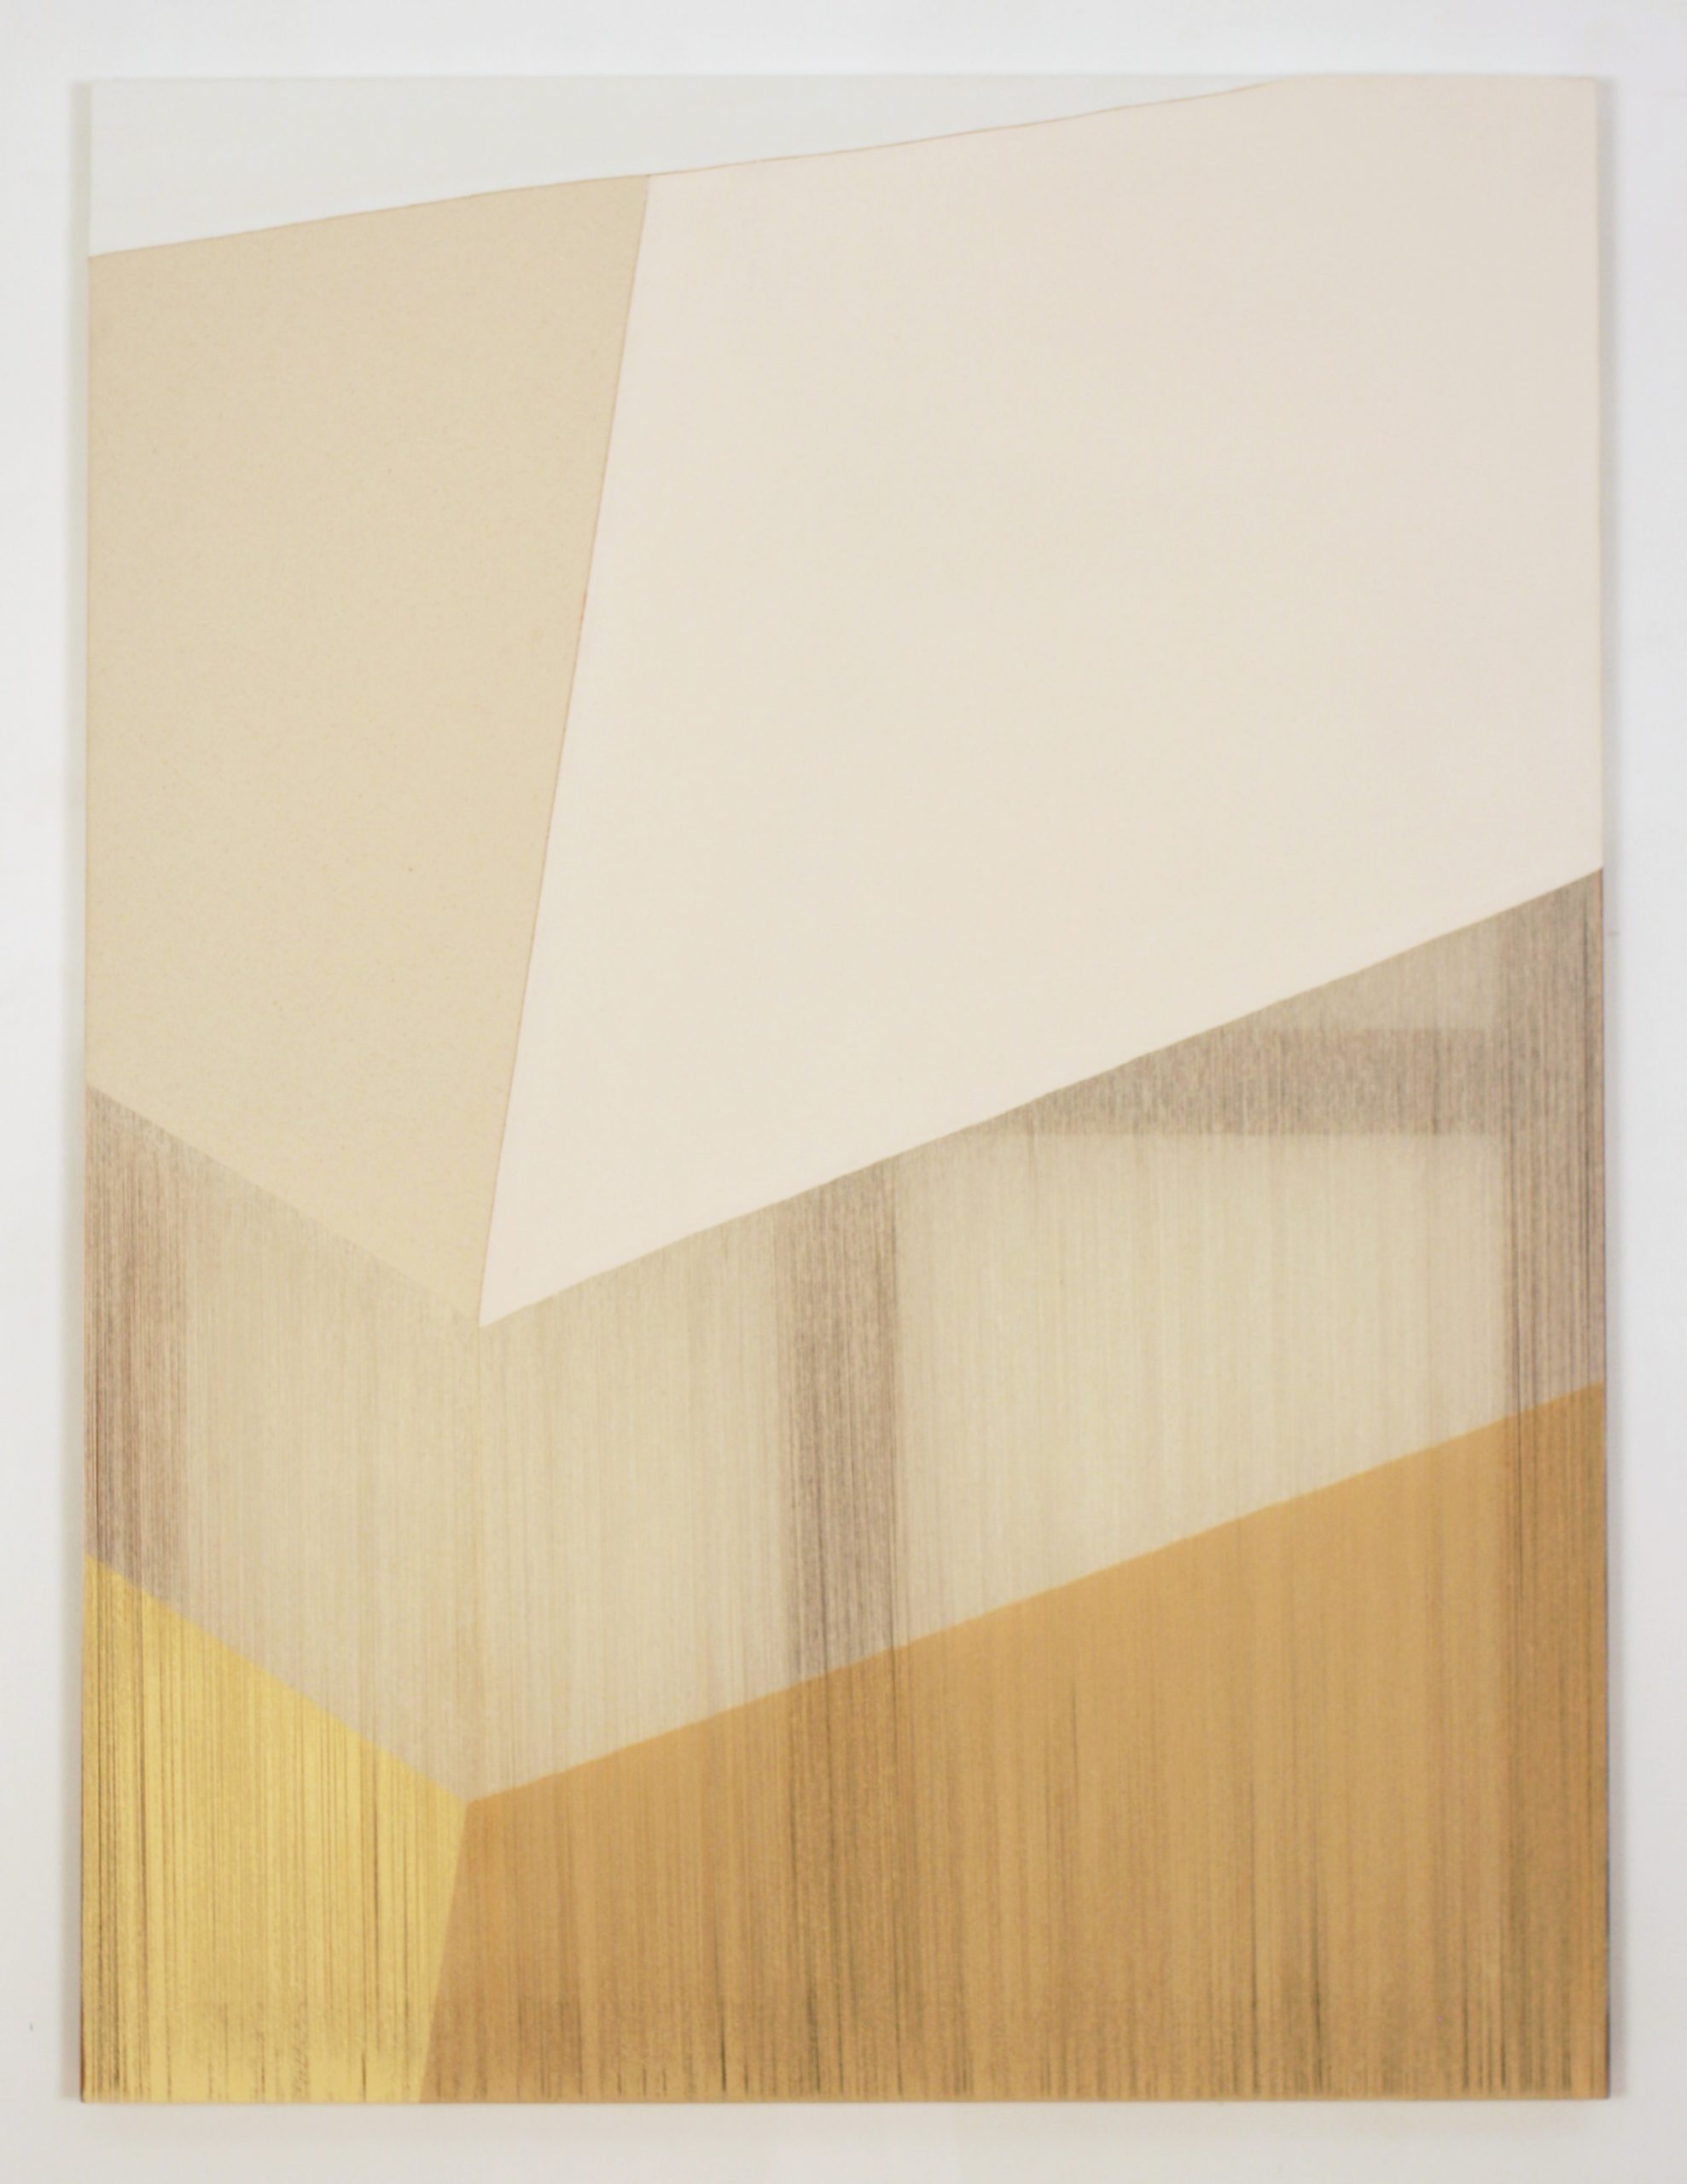 Rebecca Ward, freefall, 2015, acrylic on stitched canvas, 48 x 36 in